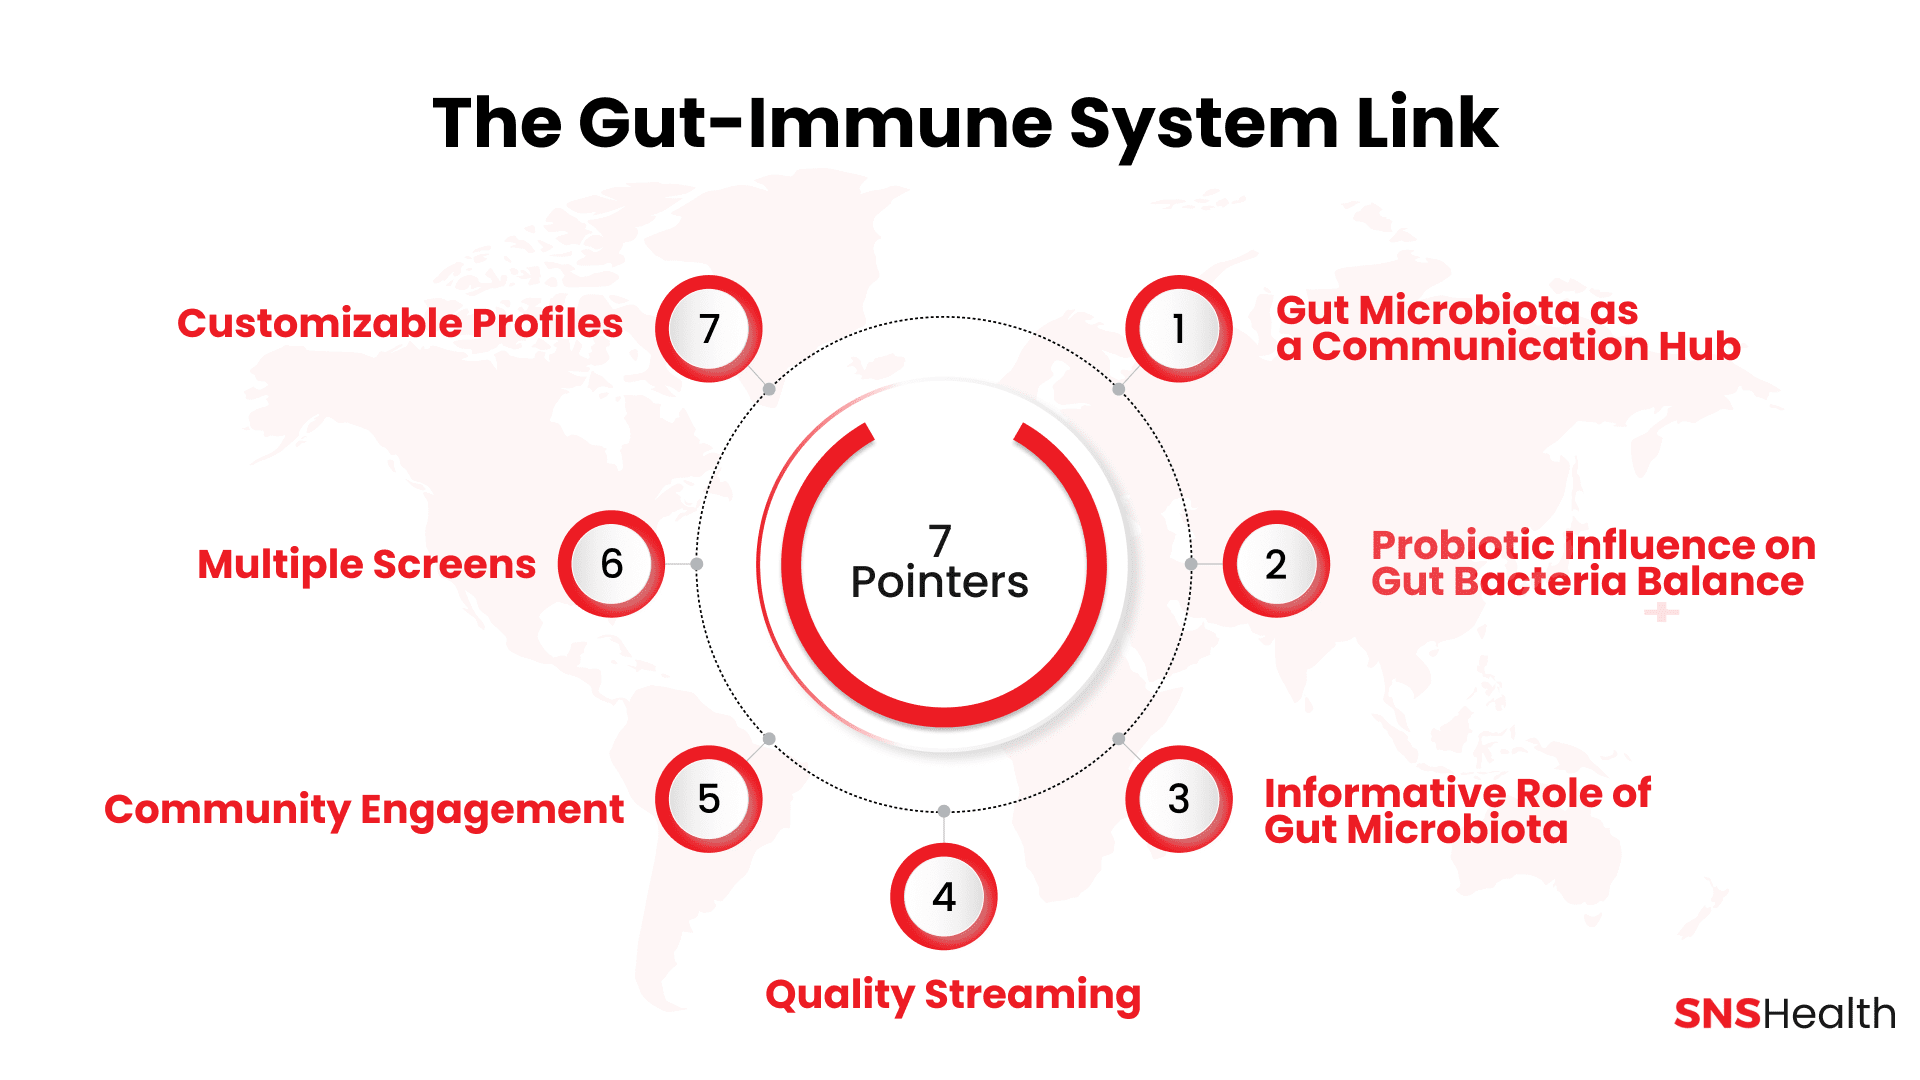 The gut-immune system link